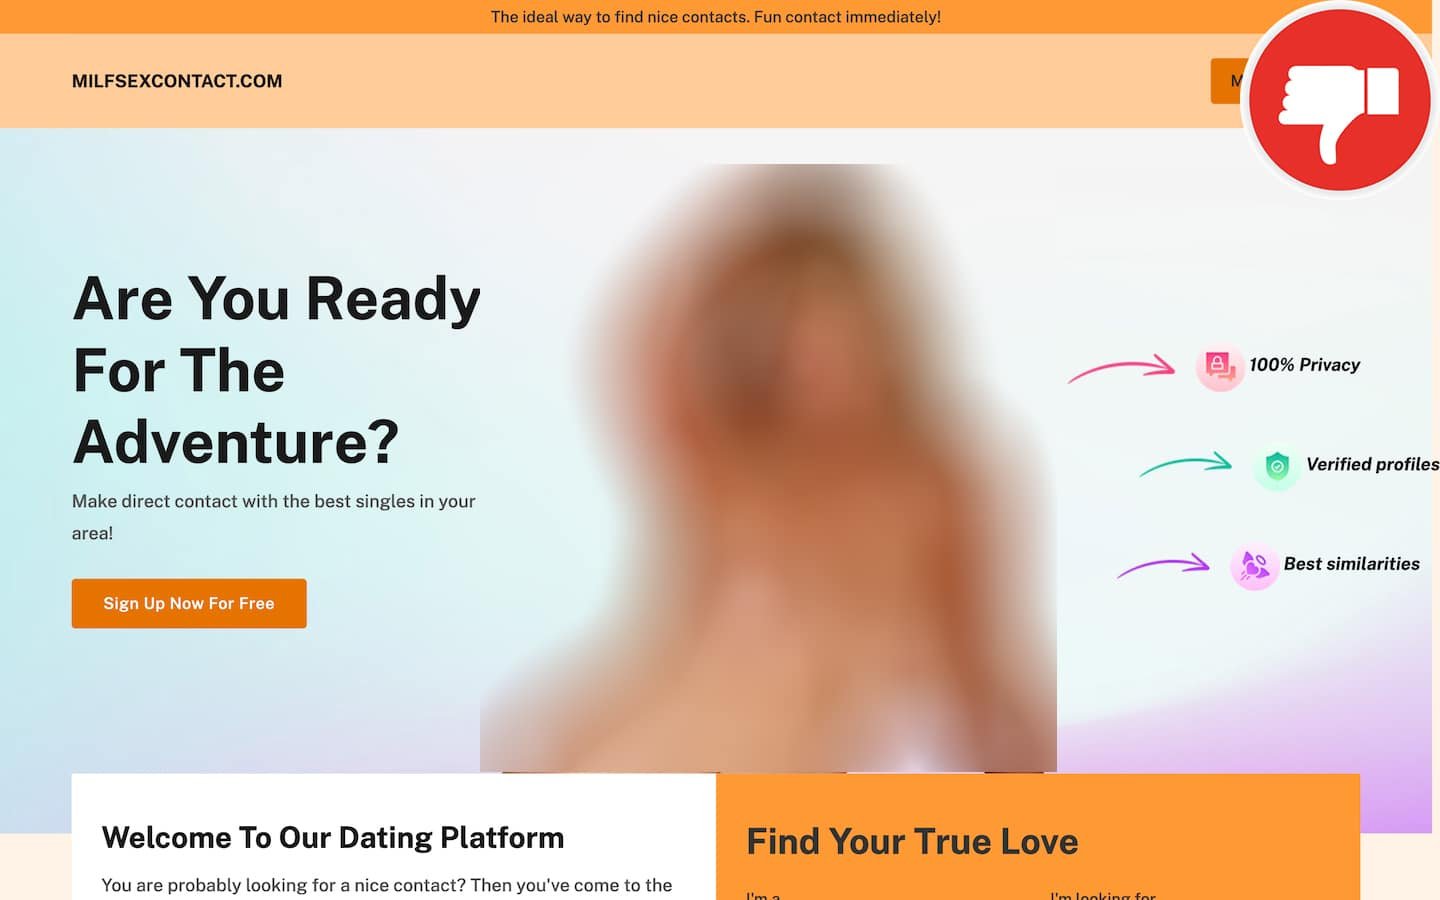 Review MilfSexContact.com scam experience